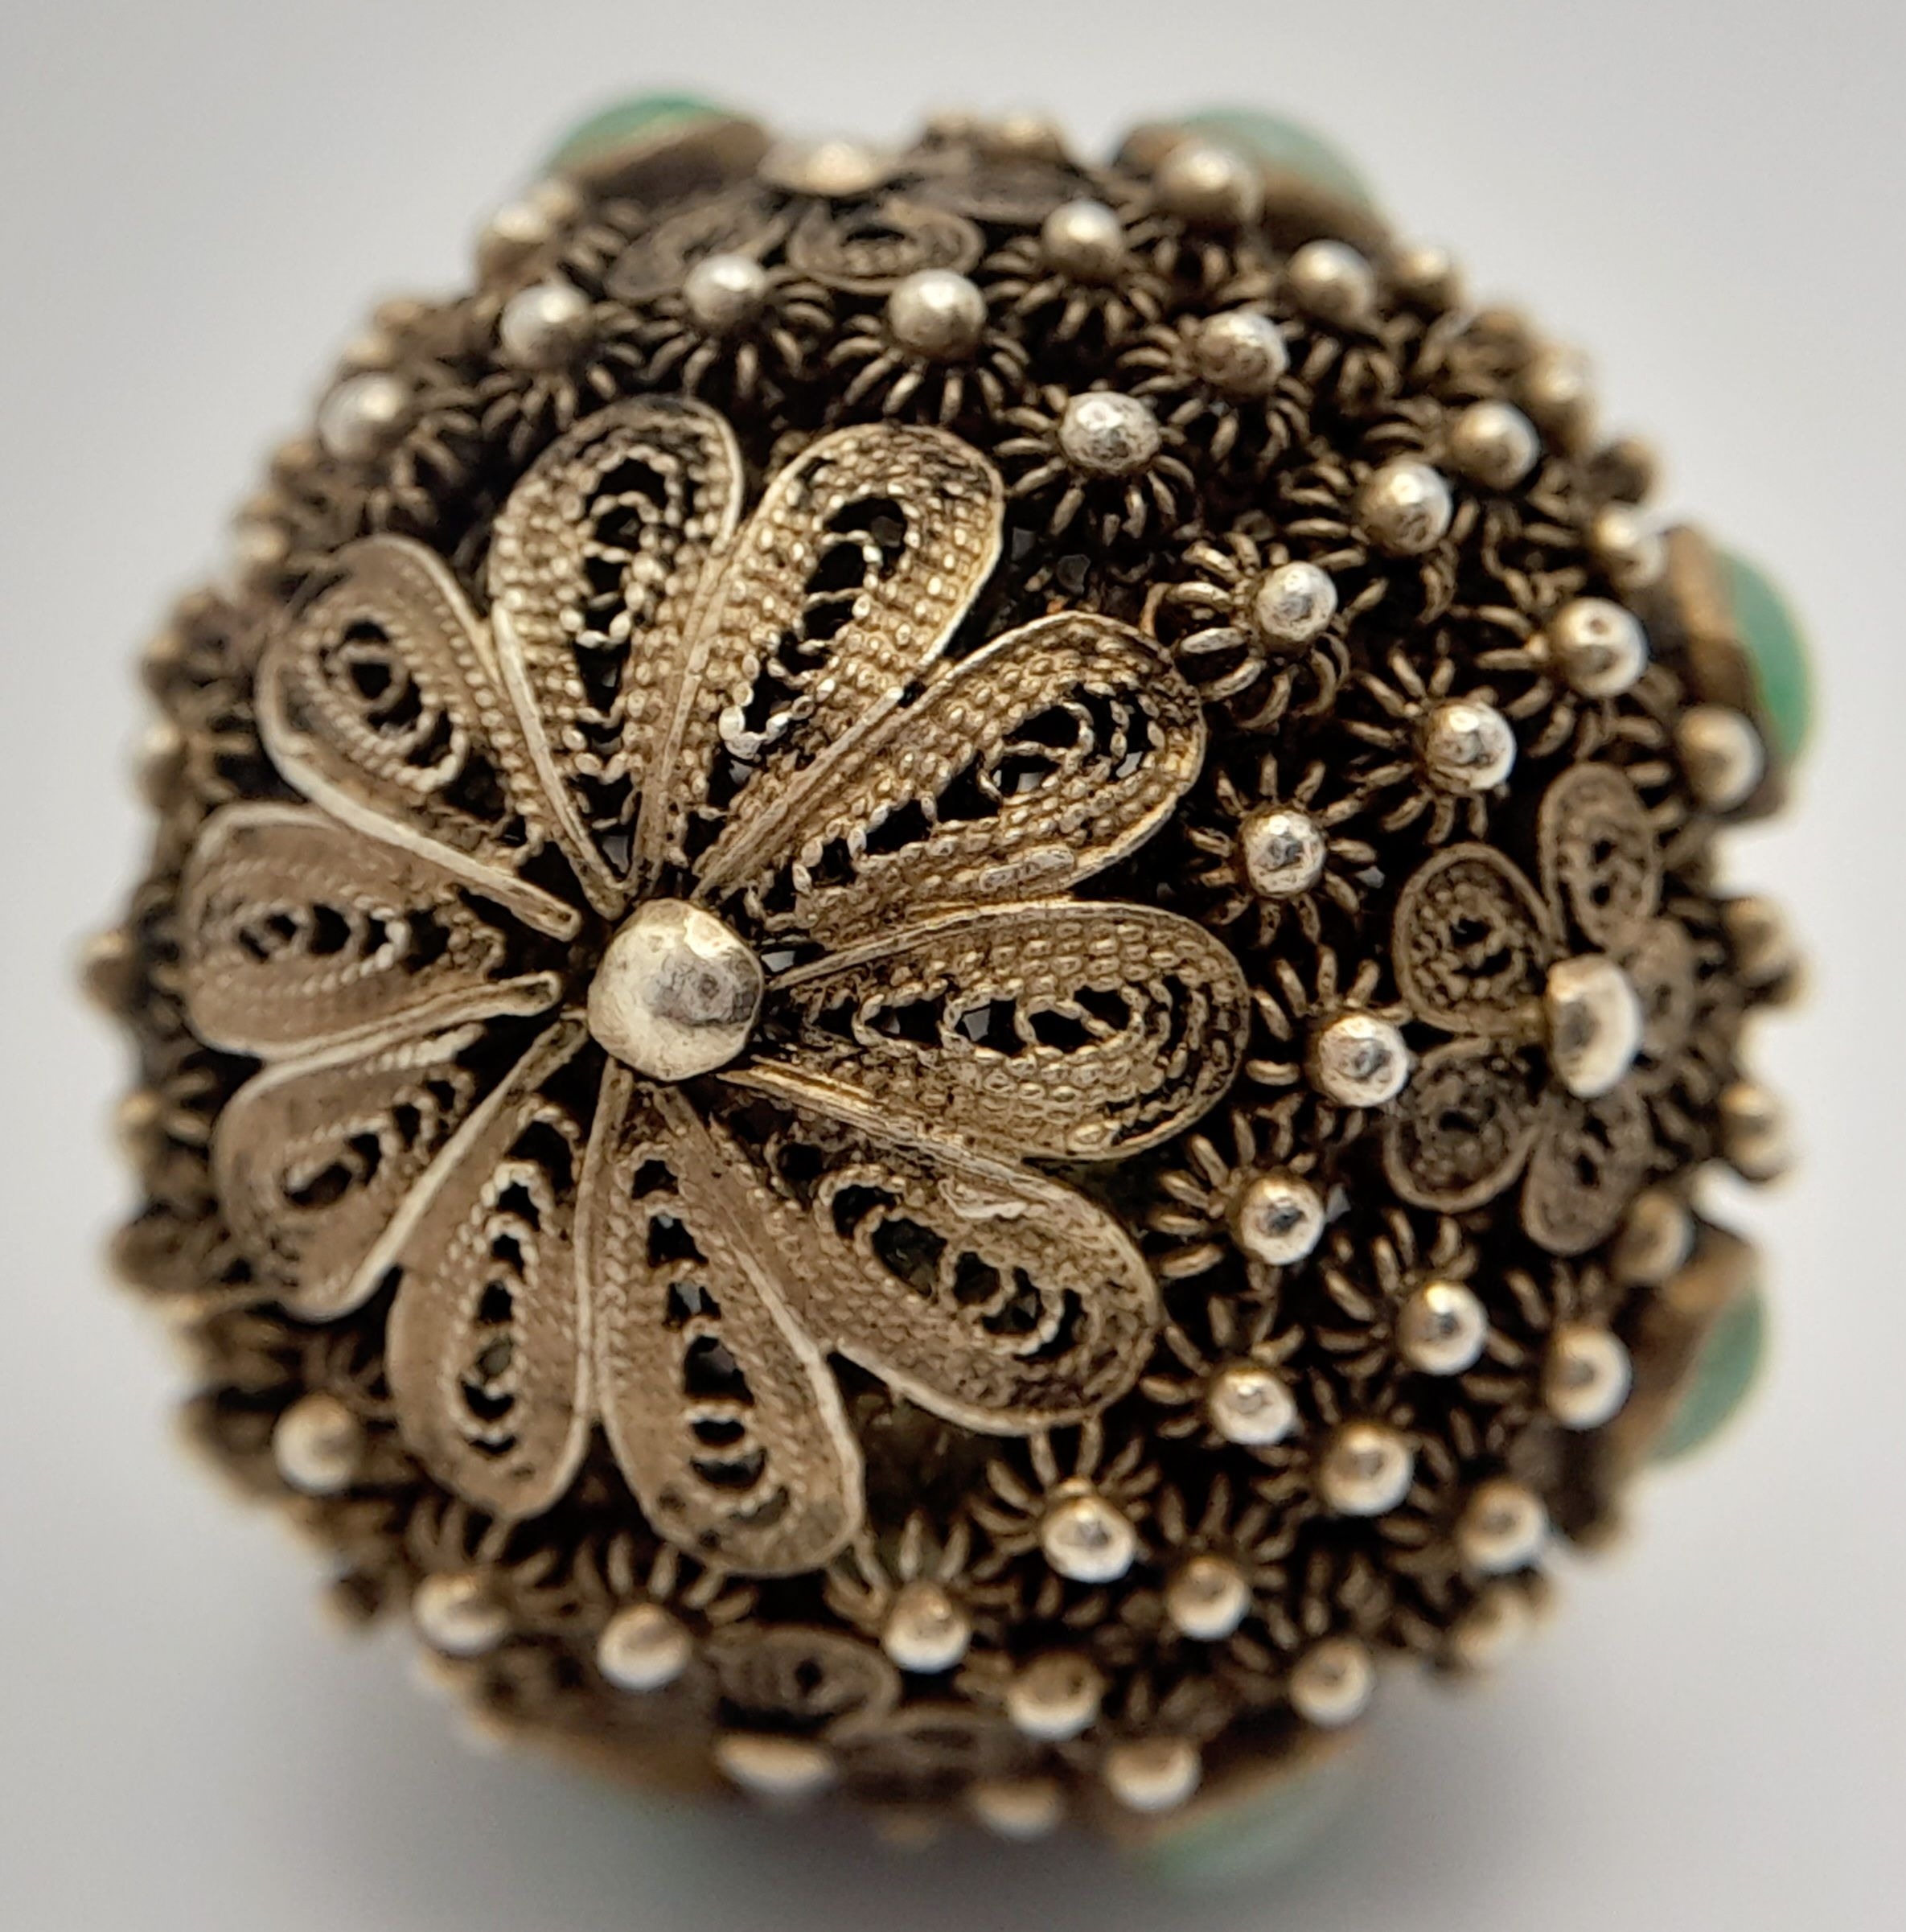 An Antique Gold Plated Silver Decorative Orb Pendant. Ornate filigree work with jade accents. 3.5cm. - Image 2 of 5